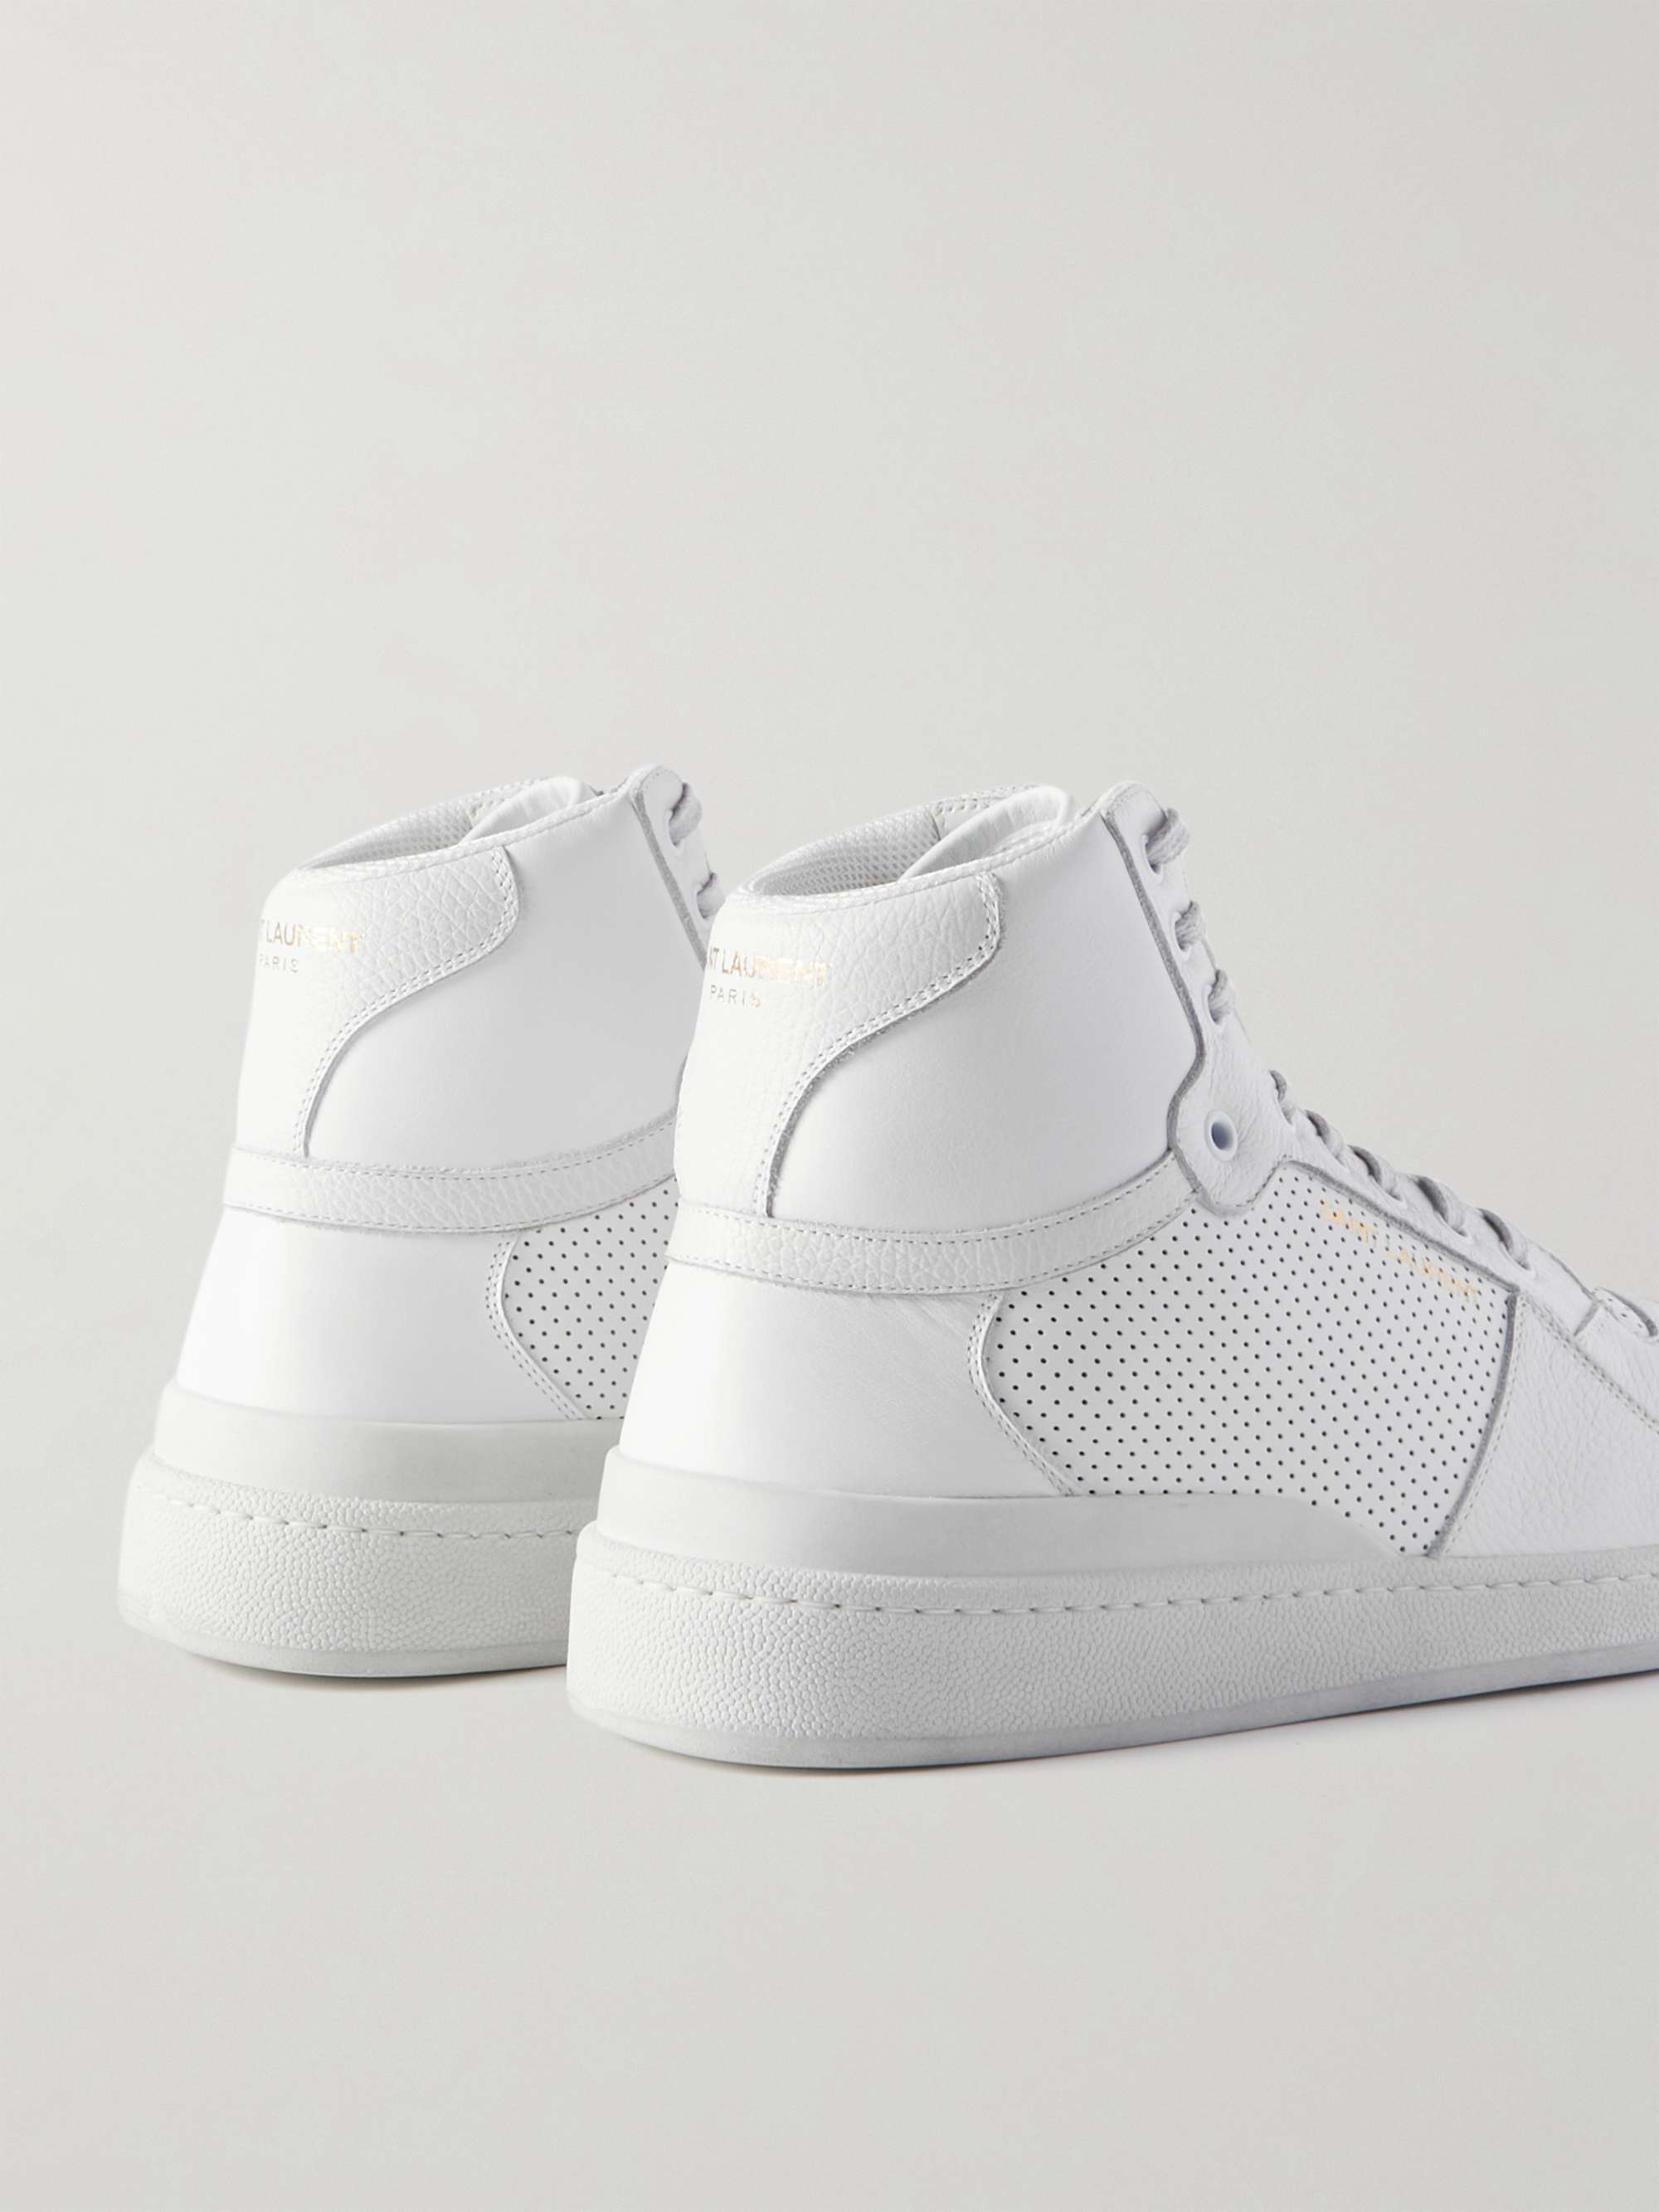 SAINT LAURENT SL/24 Perforated Leather High-Top Sneakers